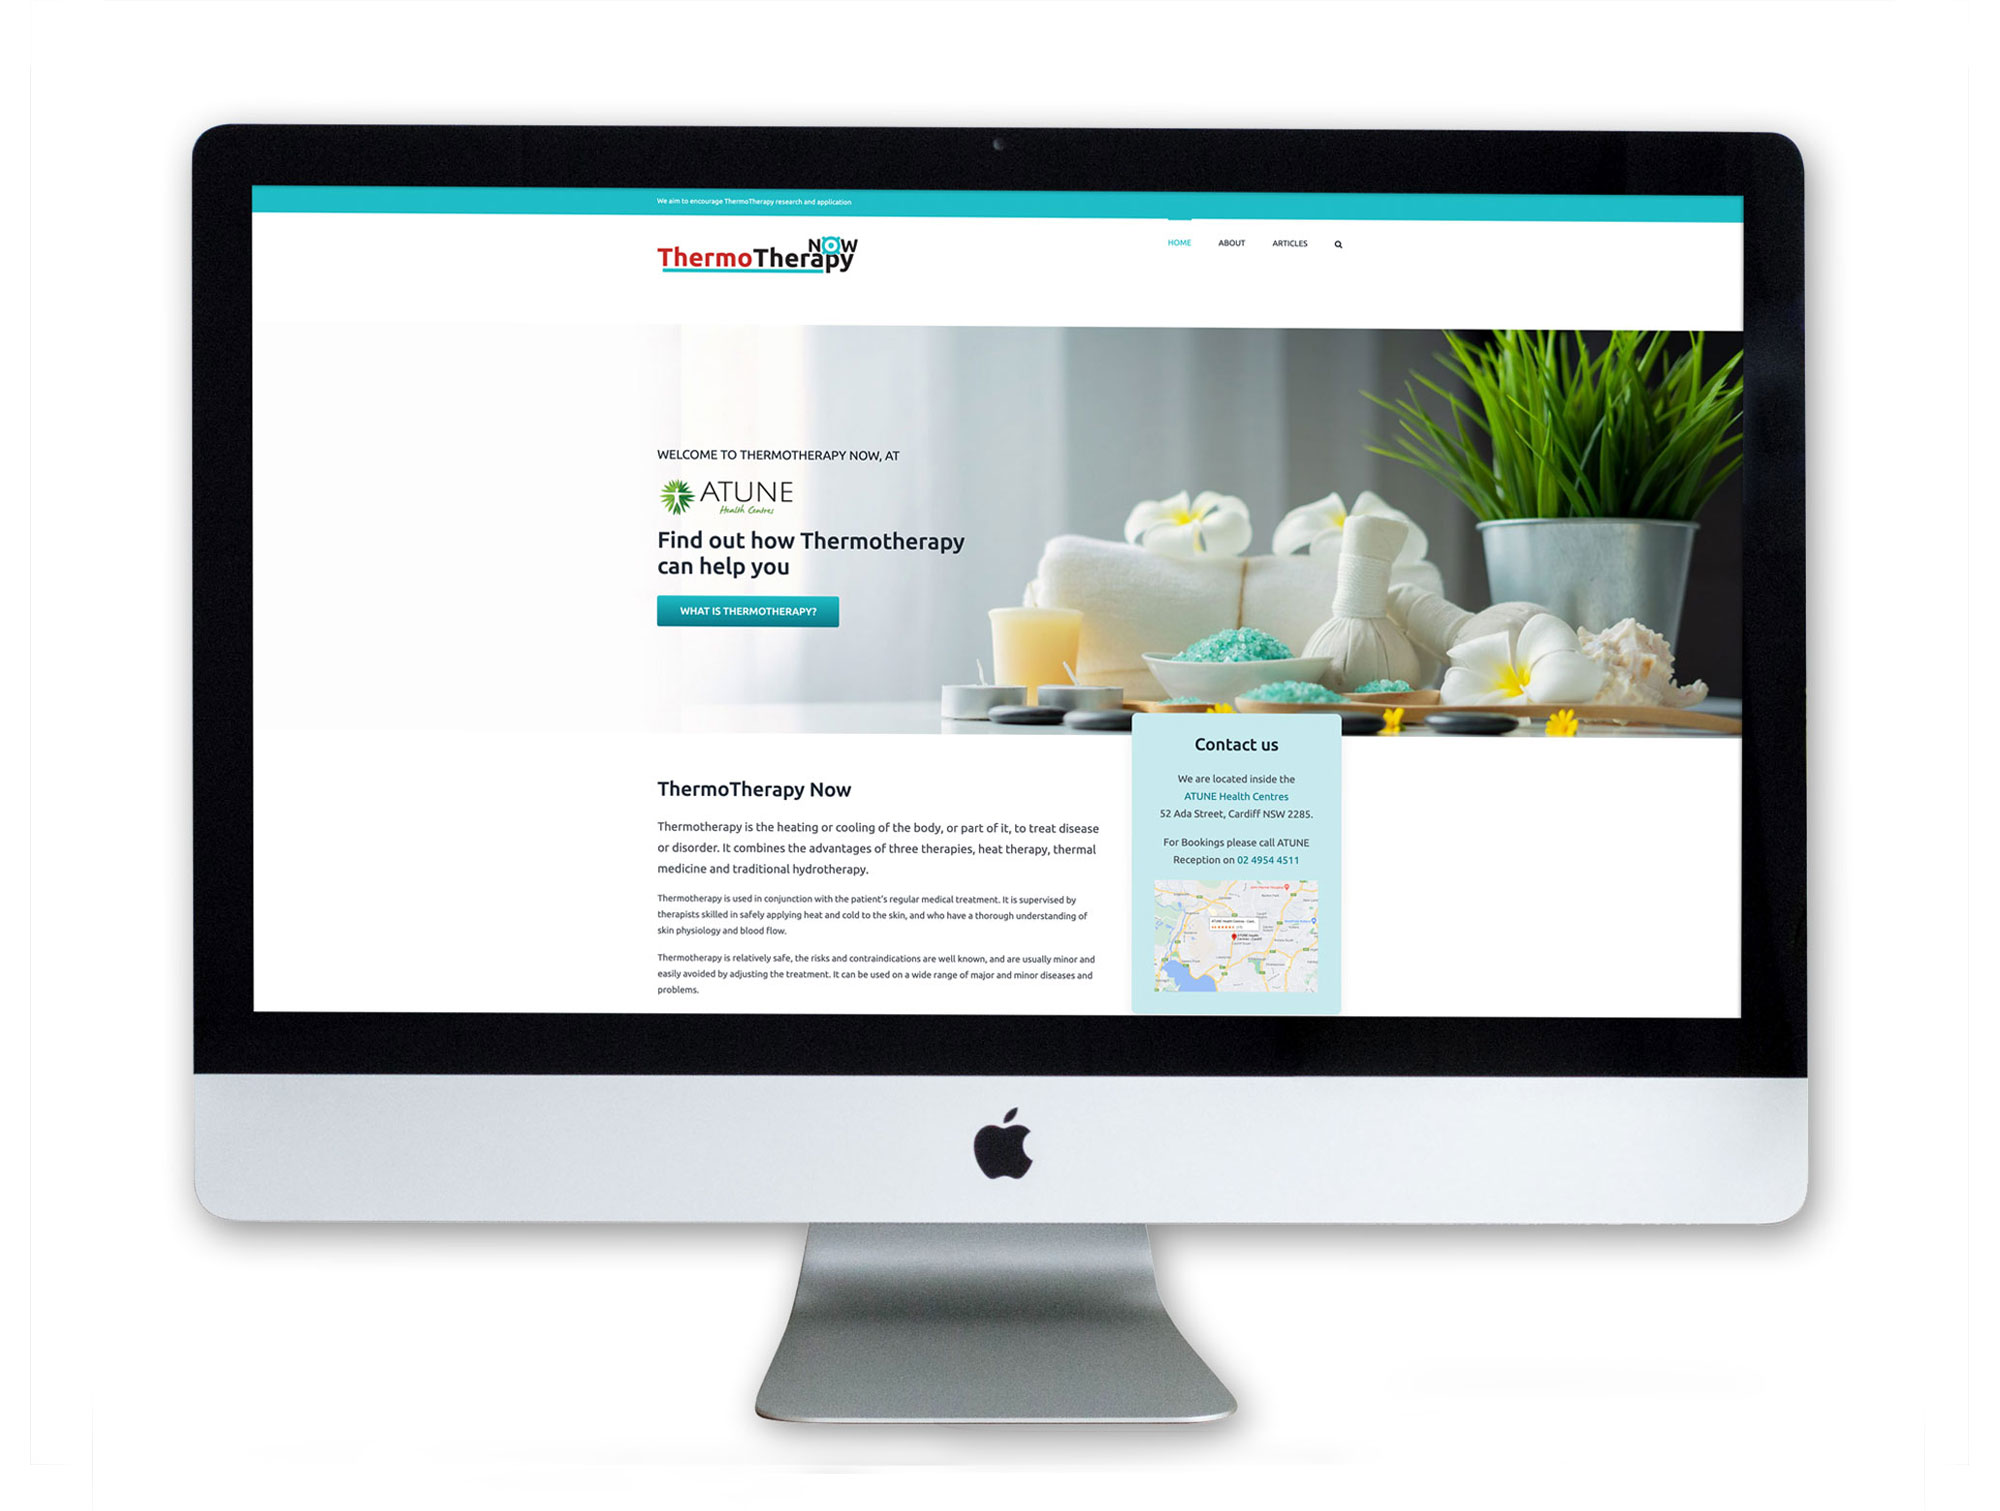 Thermotherapy Now, web design by WatersDesigns